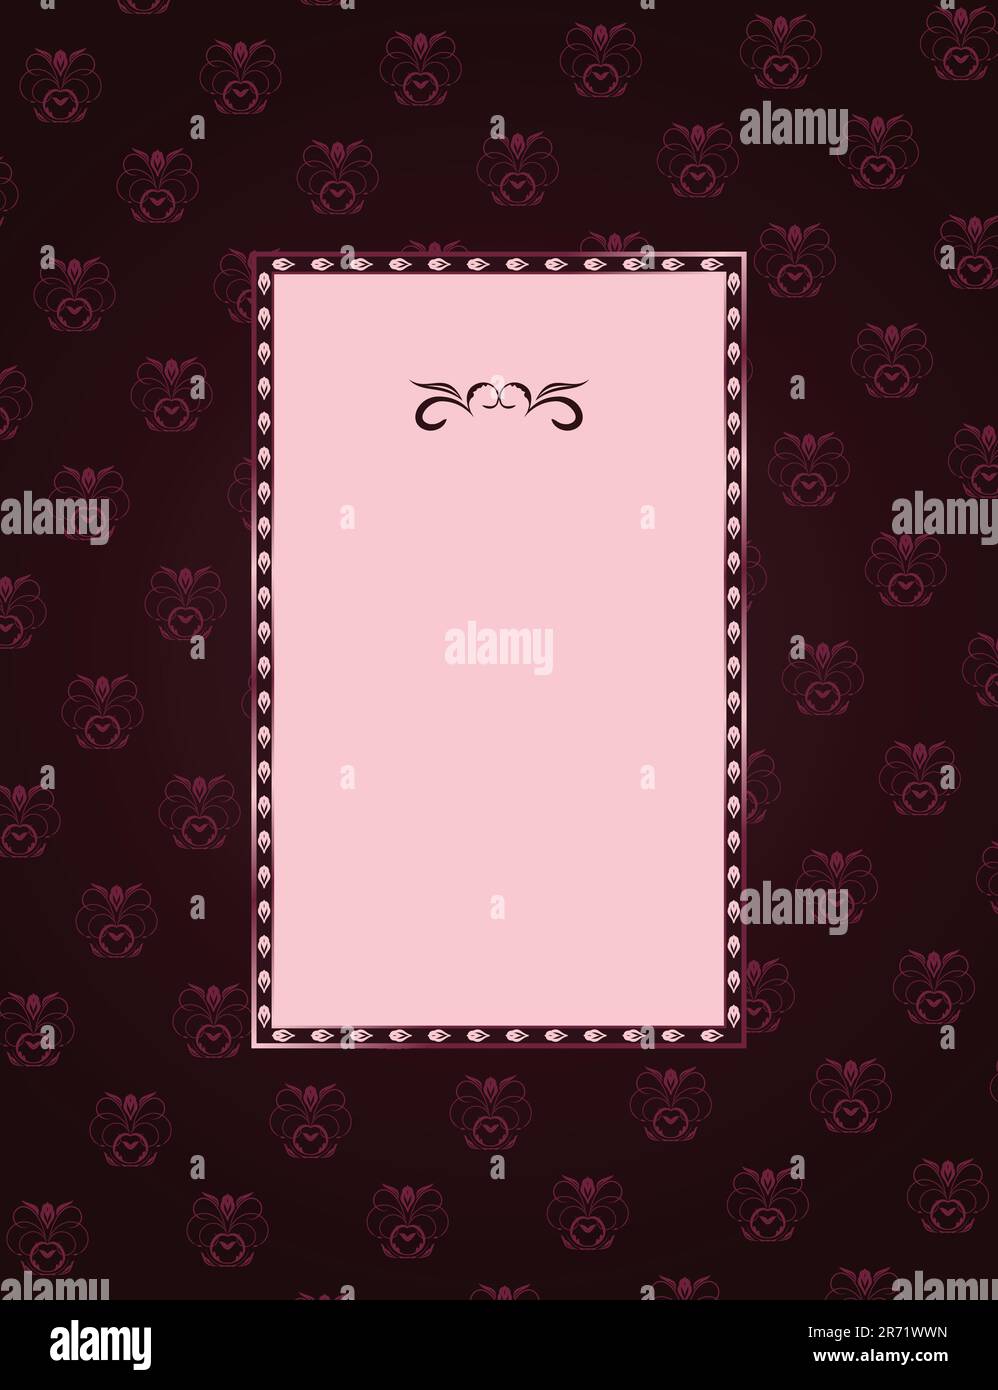 Illustration of cute floral frame. vector Stock Vector